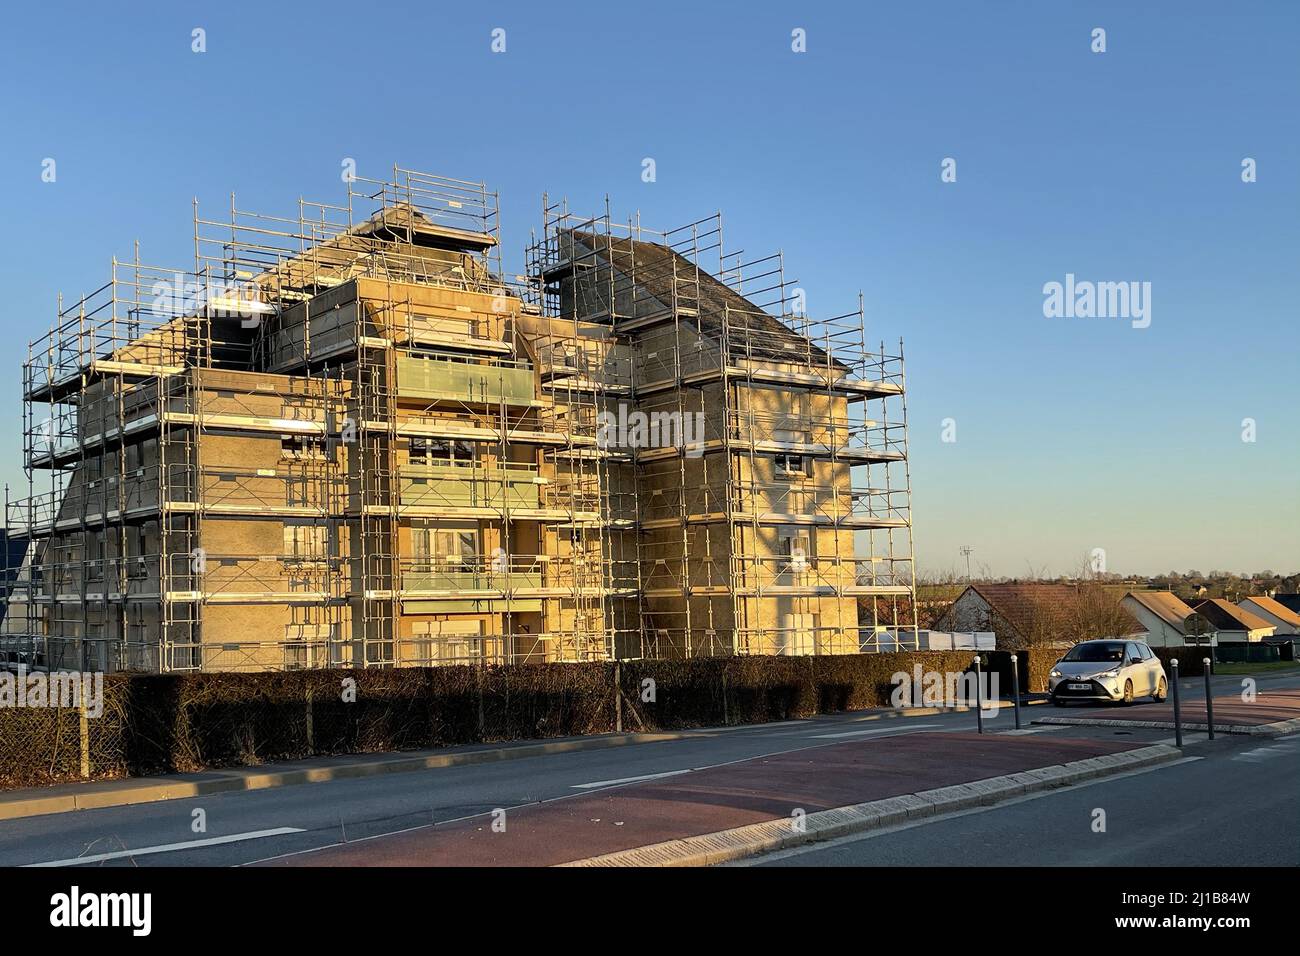 SCAFFOLDING FOR EXTERIOR RESTORATION AND RENOVATION WORK ON A SUBSIDIZED HOUSING APARTMENT BUILDING,  RUGLES, EURE, FRANCE Stock Photo